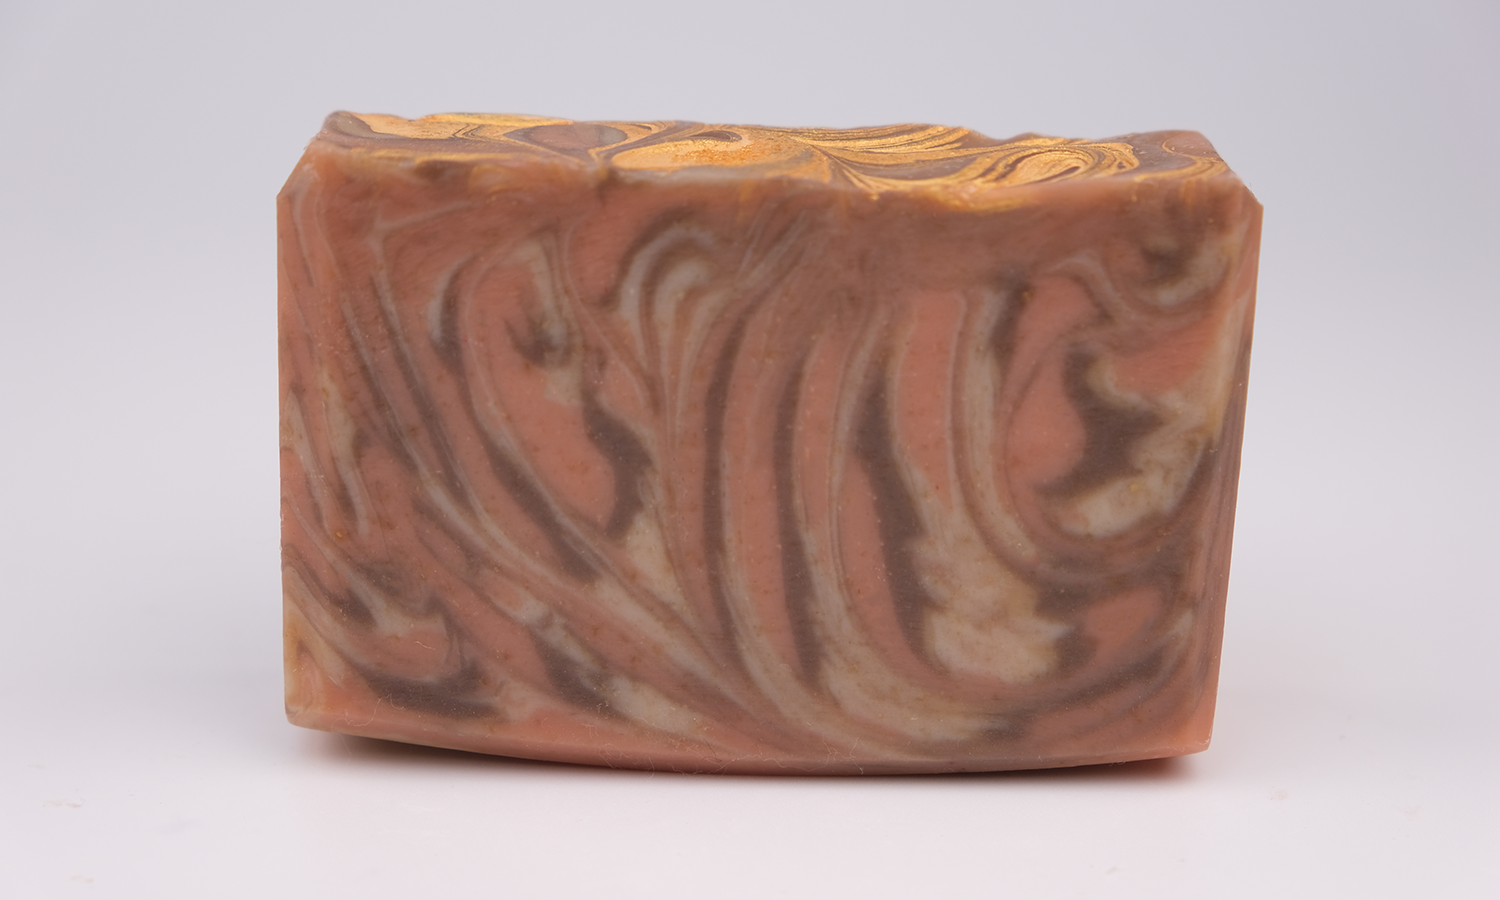 Amber and Rosewood Soap Bar